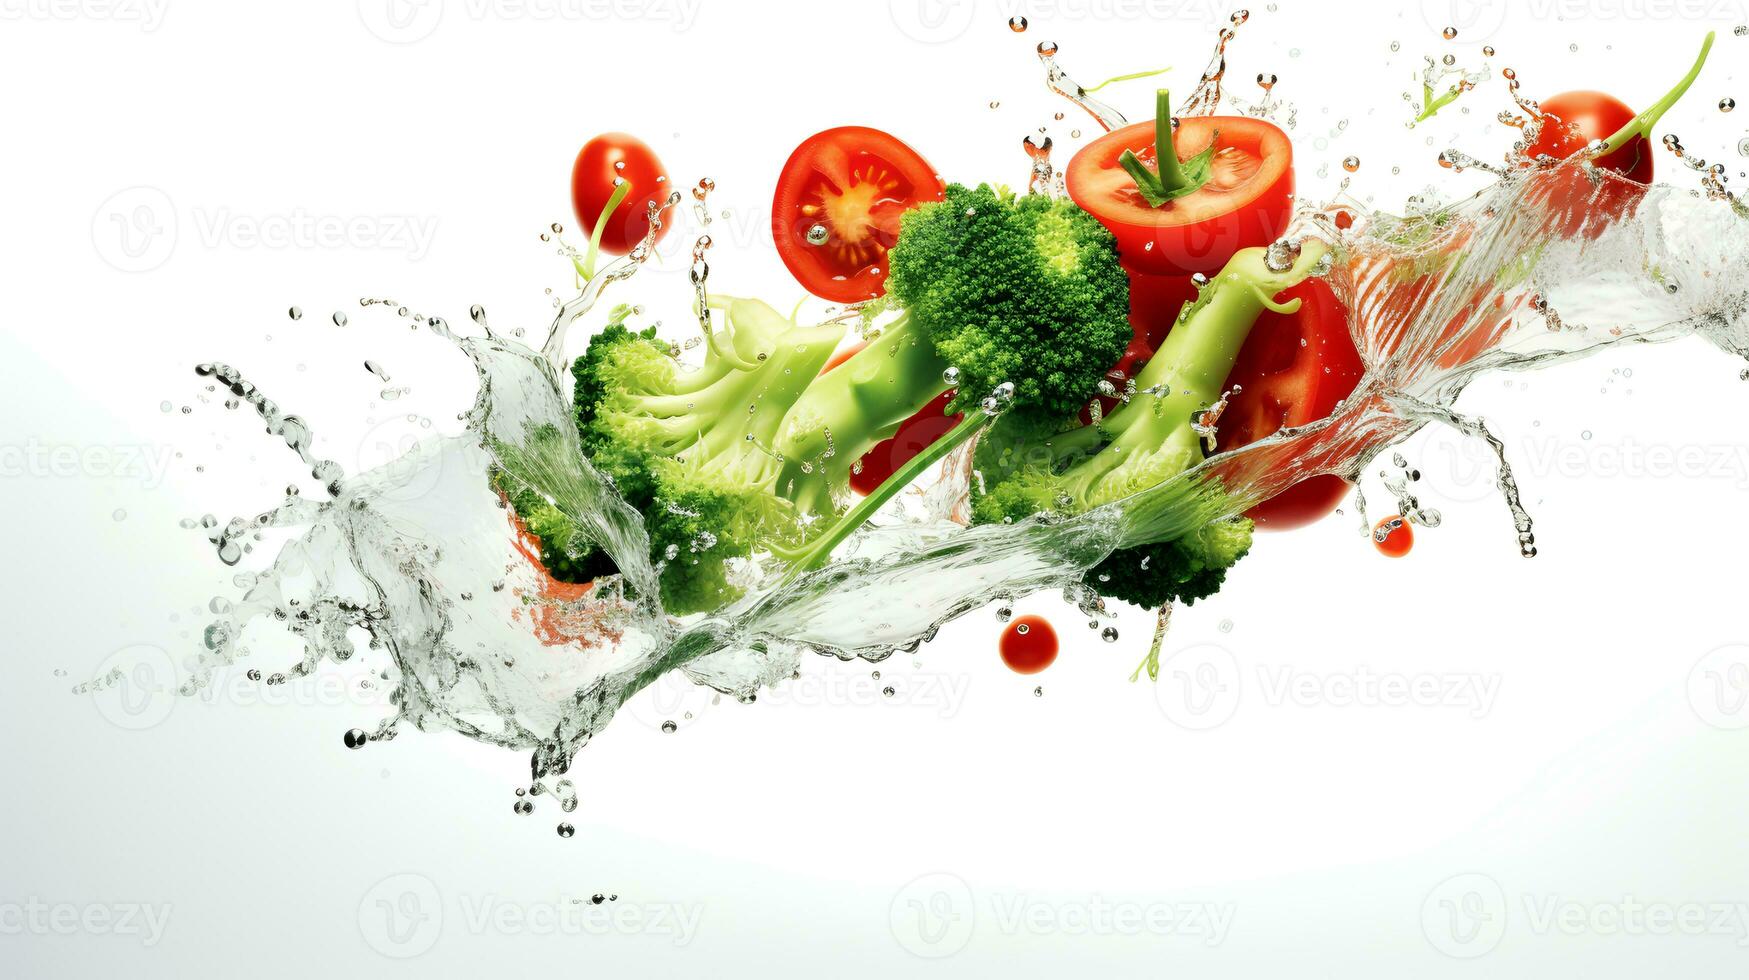 Photo of Tomatoes and broccoli with splash water isolated on white background